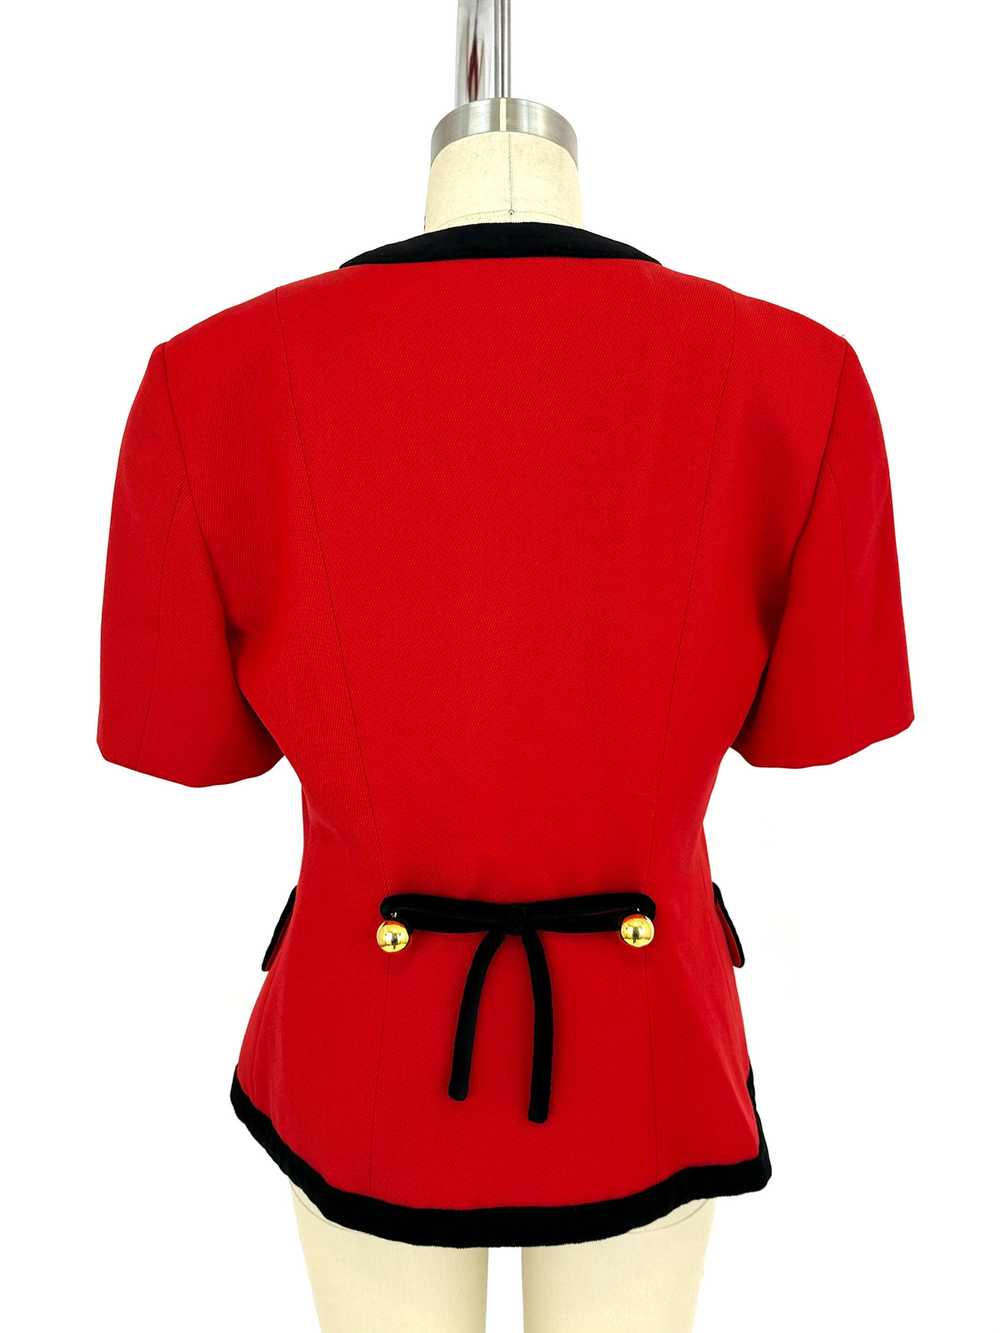 Cheap and Chic by Moschino Velour Bow Jacket - image 4